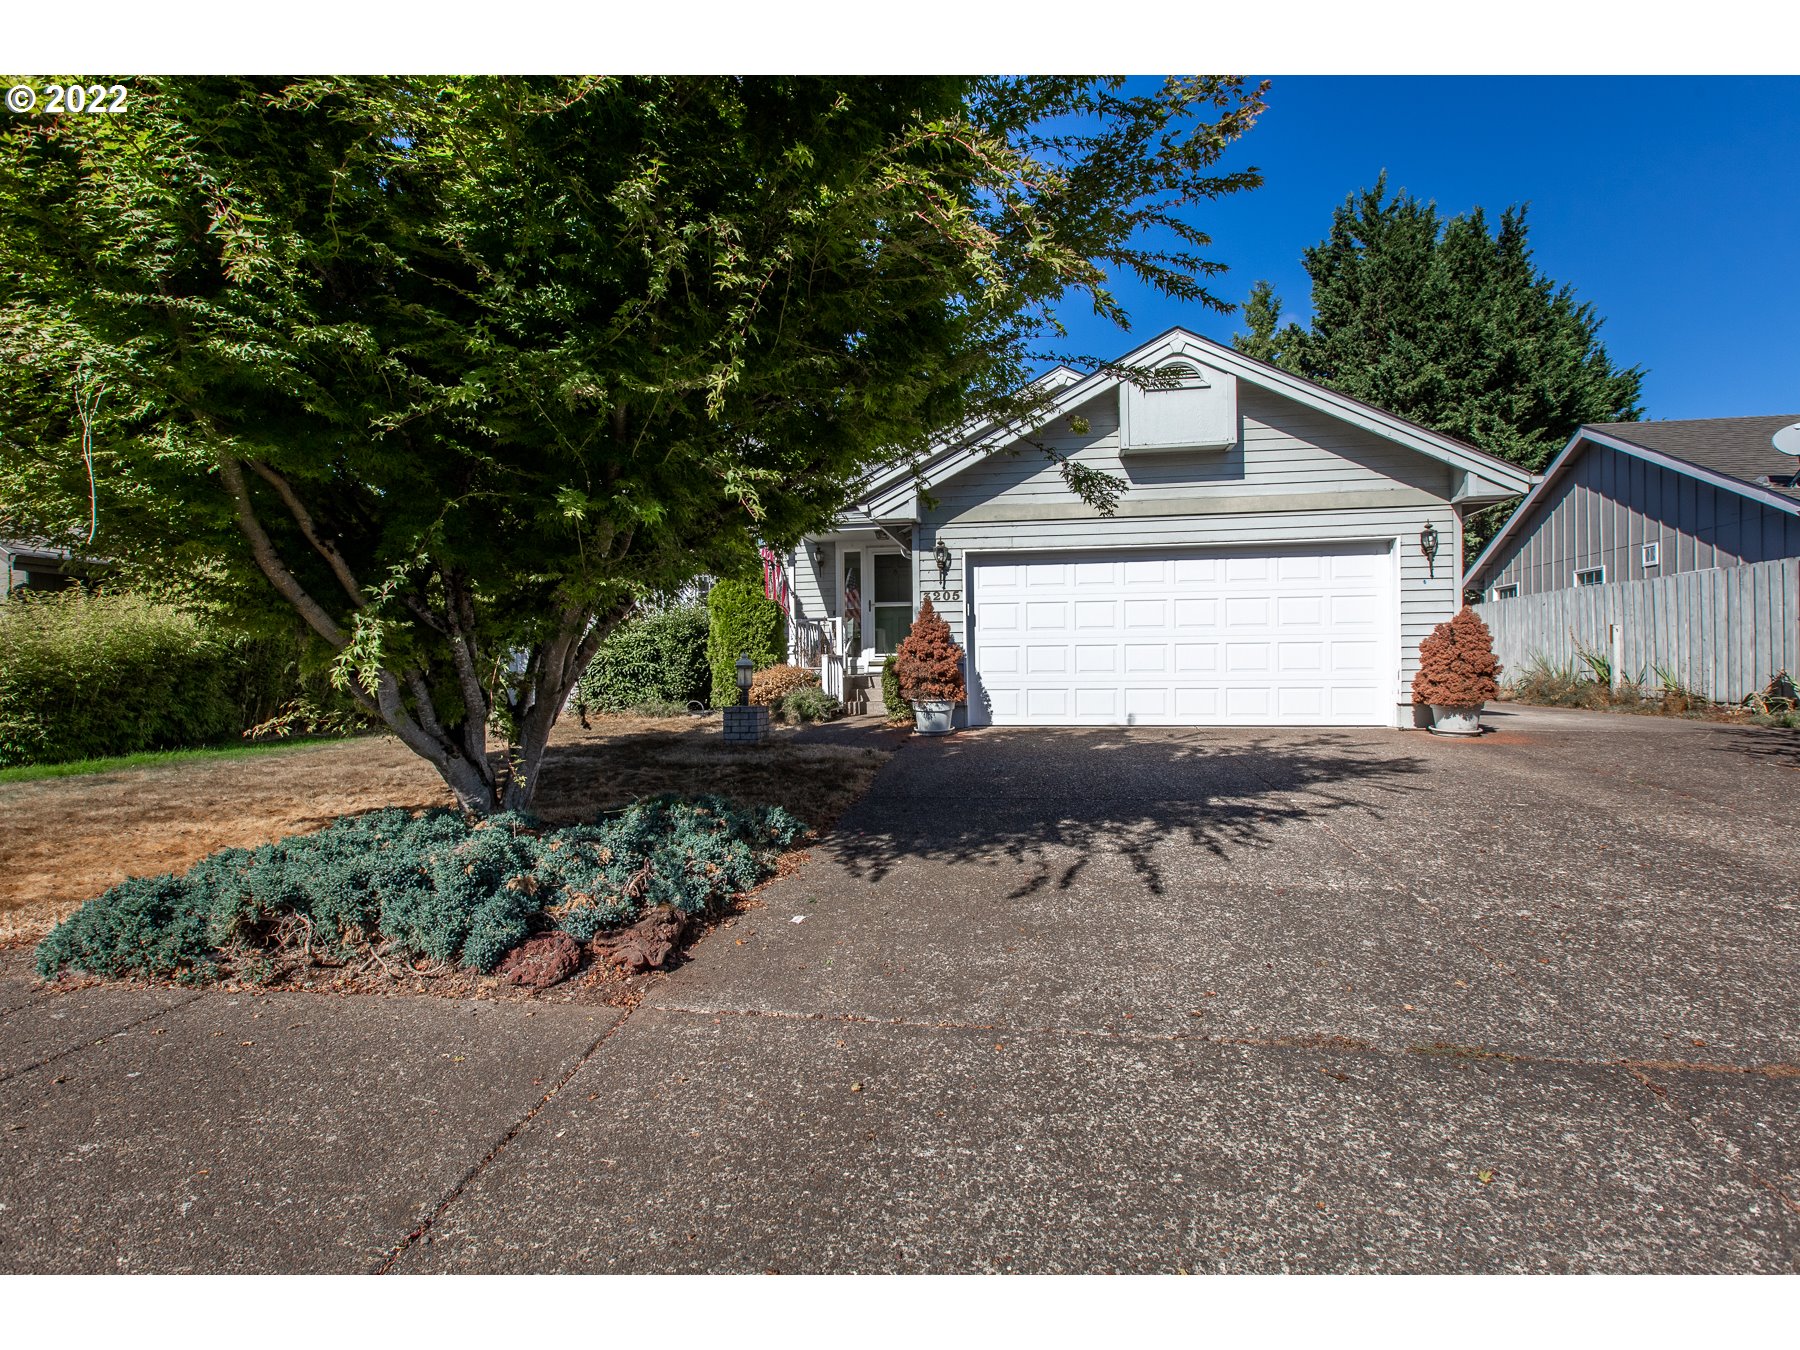 3205 QUEENS EAST ST, Eugene, OR 97401